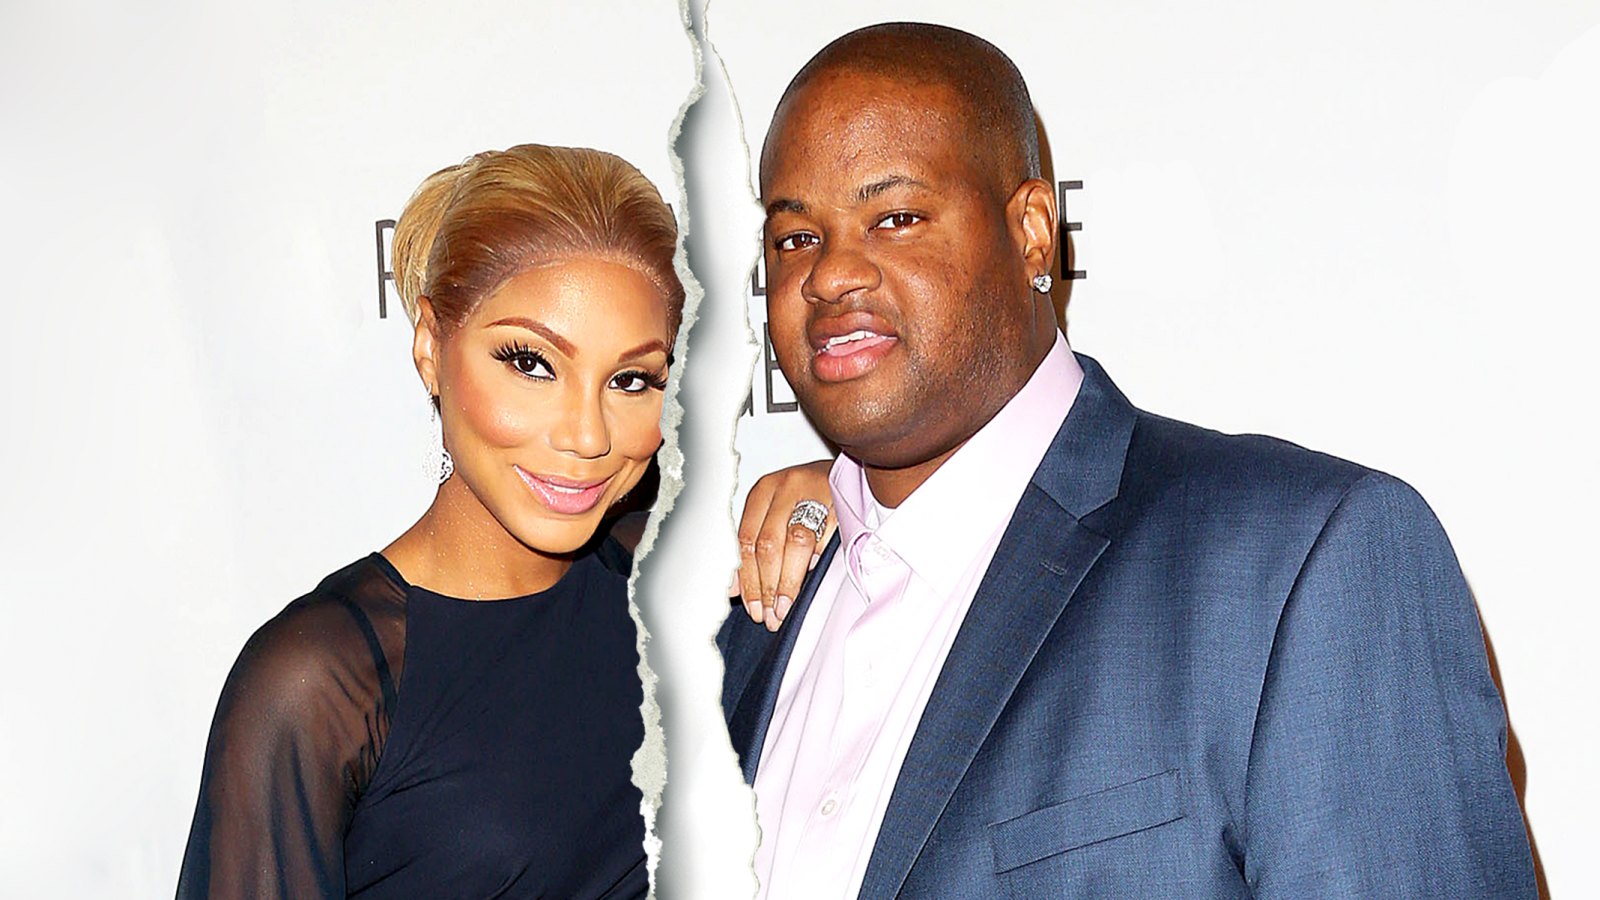 Tamar Braxton and Vincent Herbert attend The Paley Center for Media's Annual Los Angeles Benefit at The Rooftop Of The Lot in West Hollywood, California.